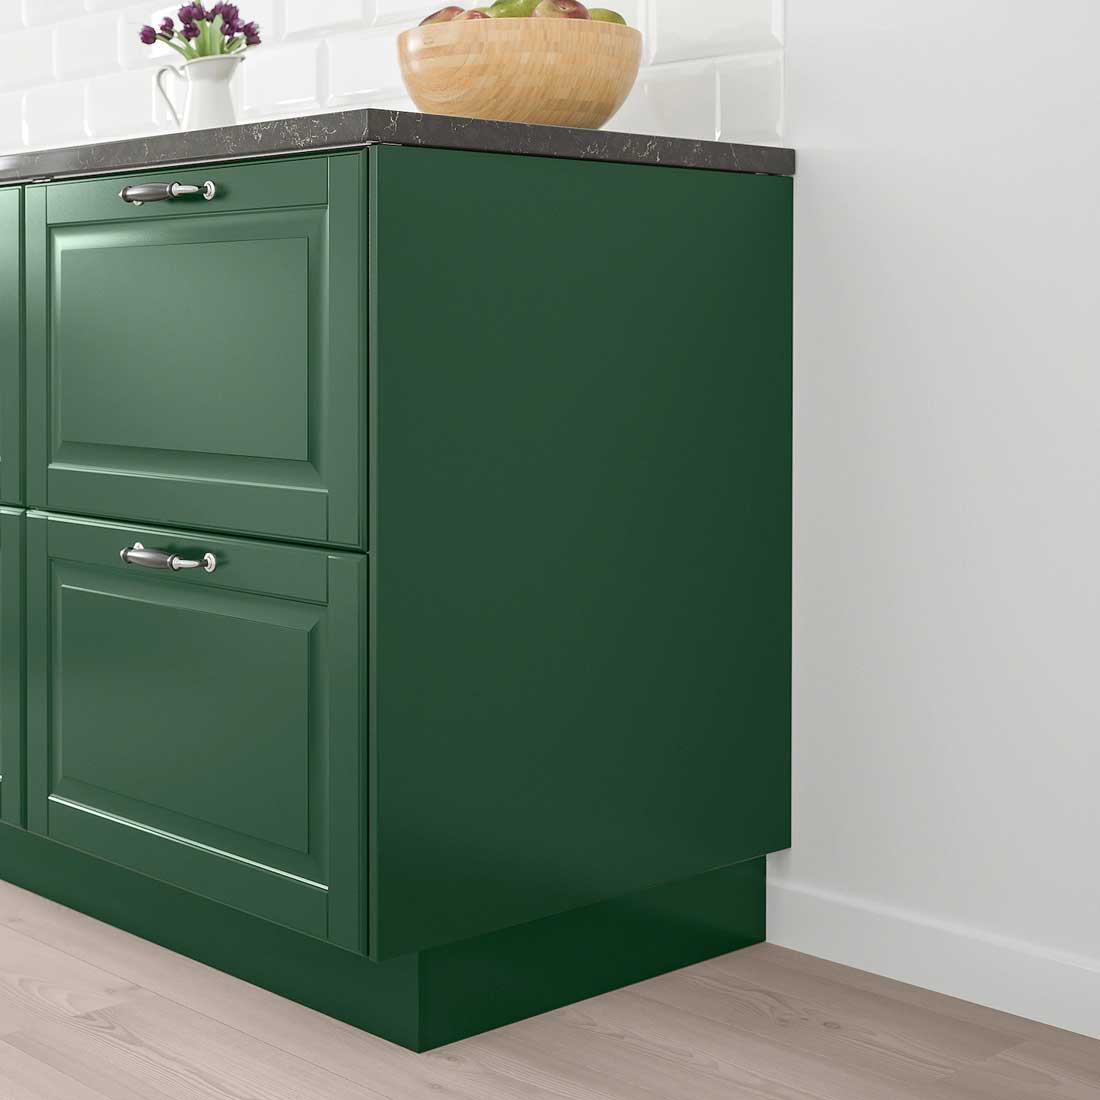 https://www.easyafford.ca/wp-content/uploads/2020/04/ikea-kitchen-cabinet-with-side-panel.jpg